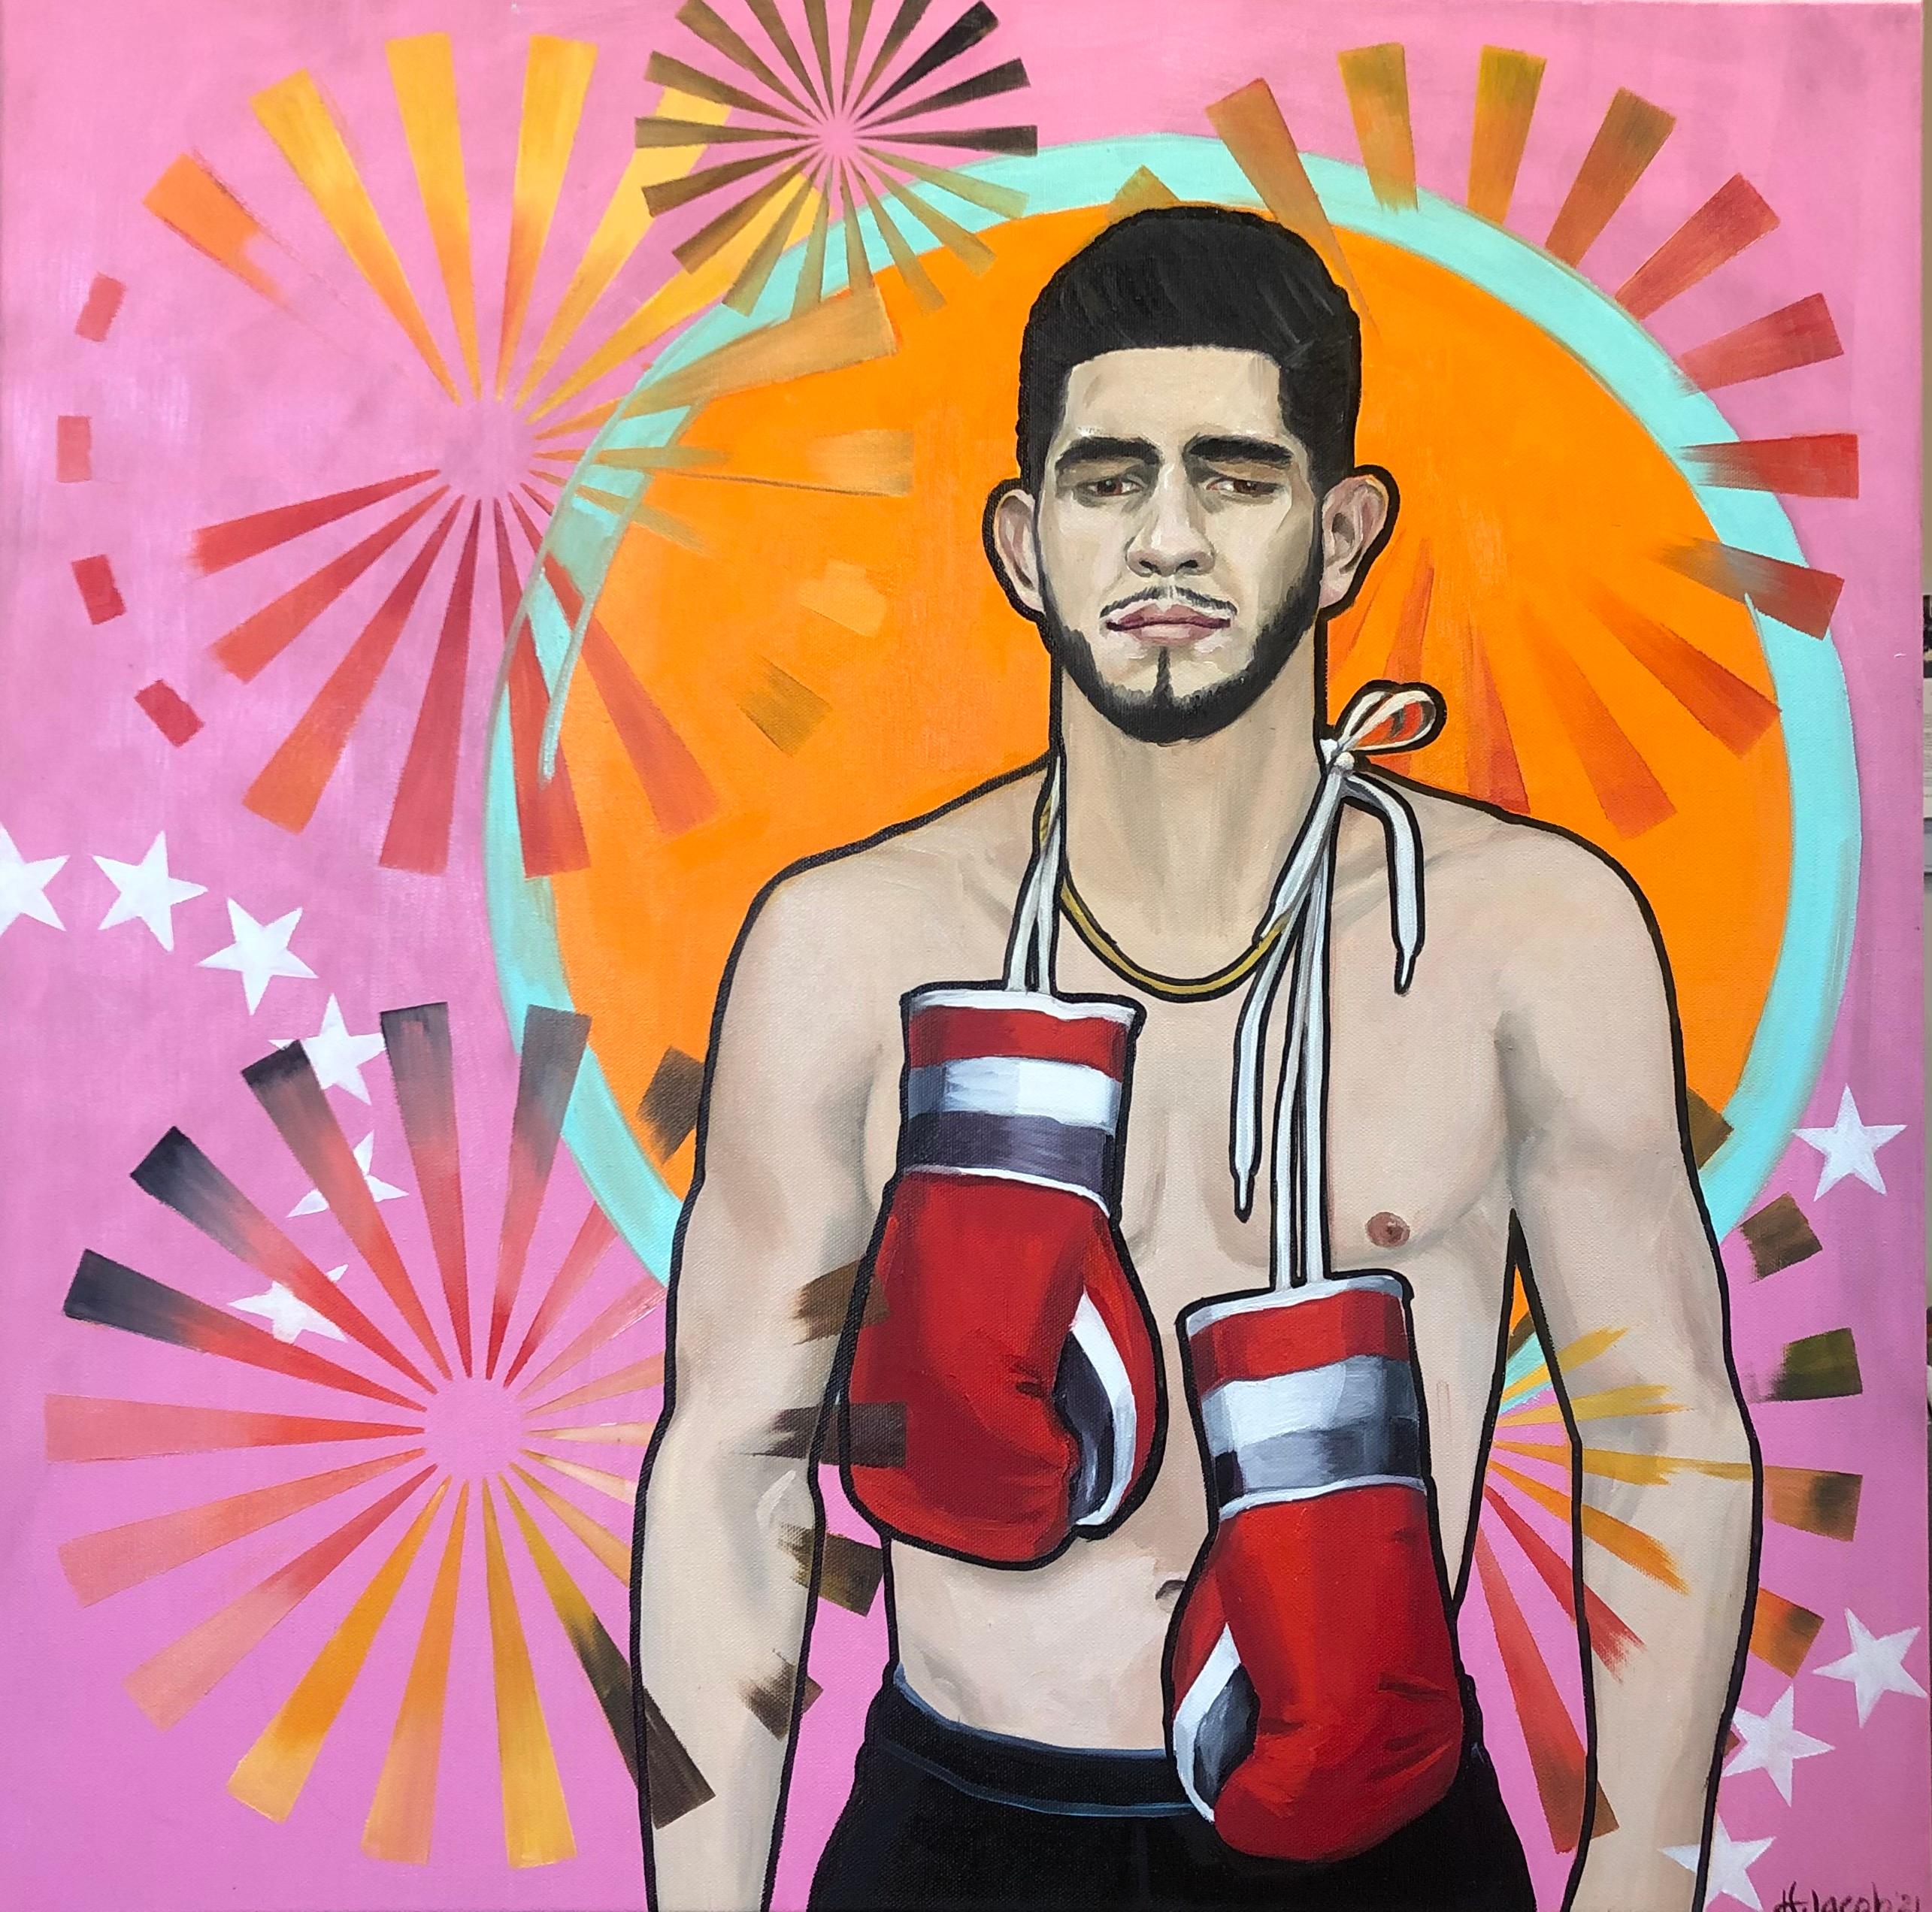  Boxing Gloves is a portrait of retired boxer Alex Saucedo by Honora Jacob. Alex Saucedo now operates a boxing training facility in Oklahoma City after retiring from a professional career in boxing.. Many of the boxers compete in the USA Nationals.